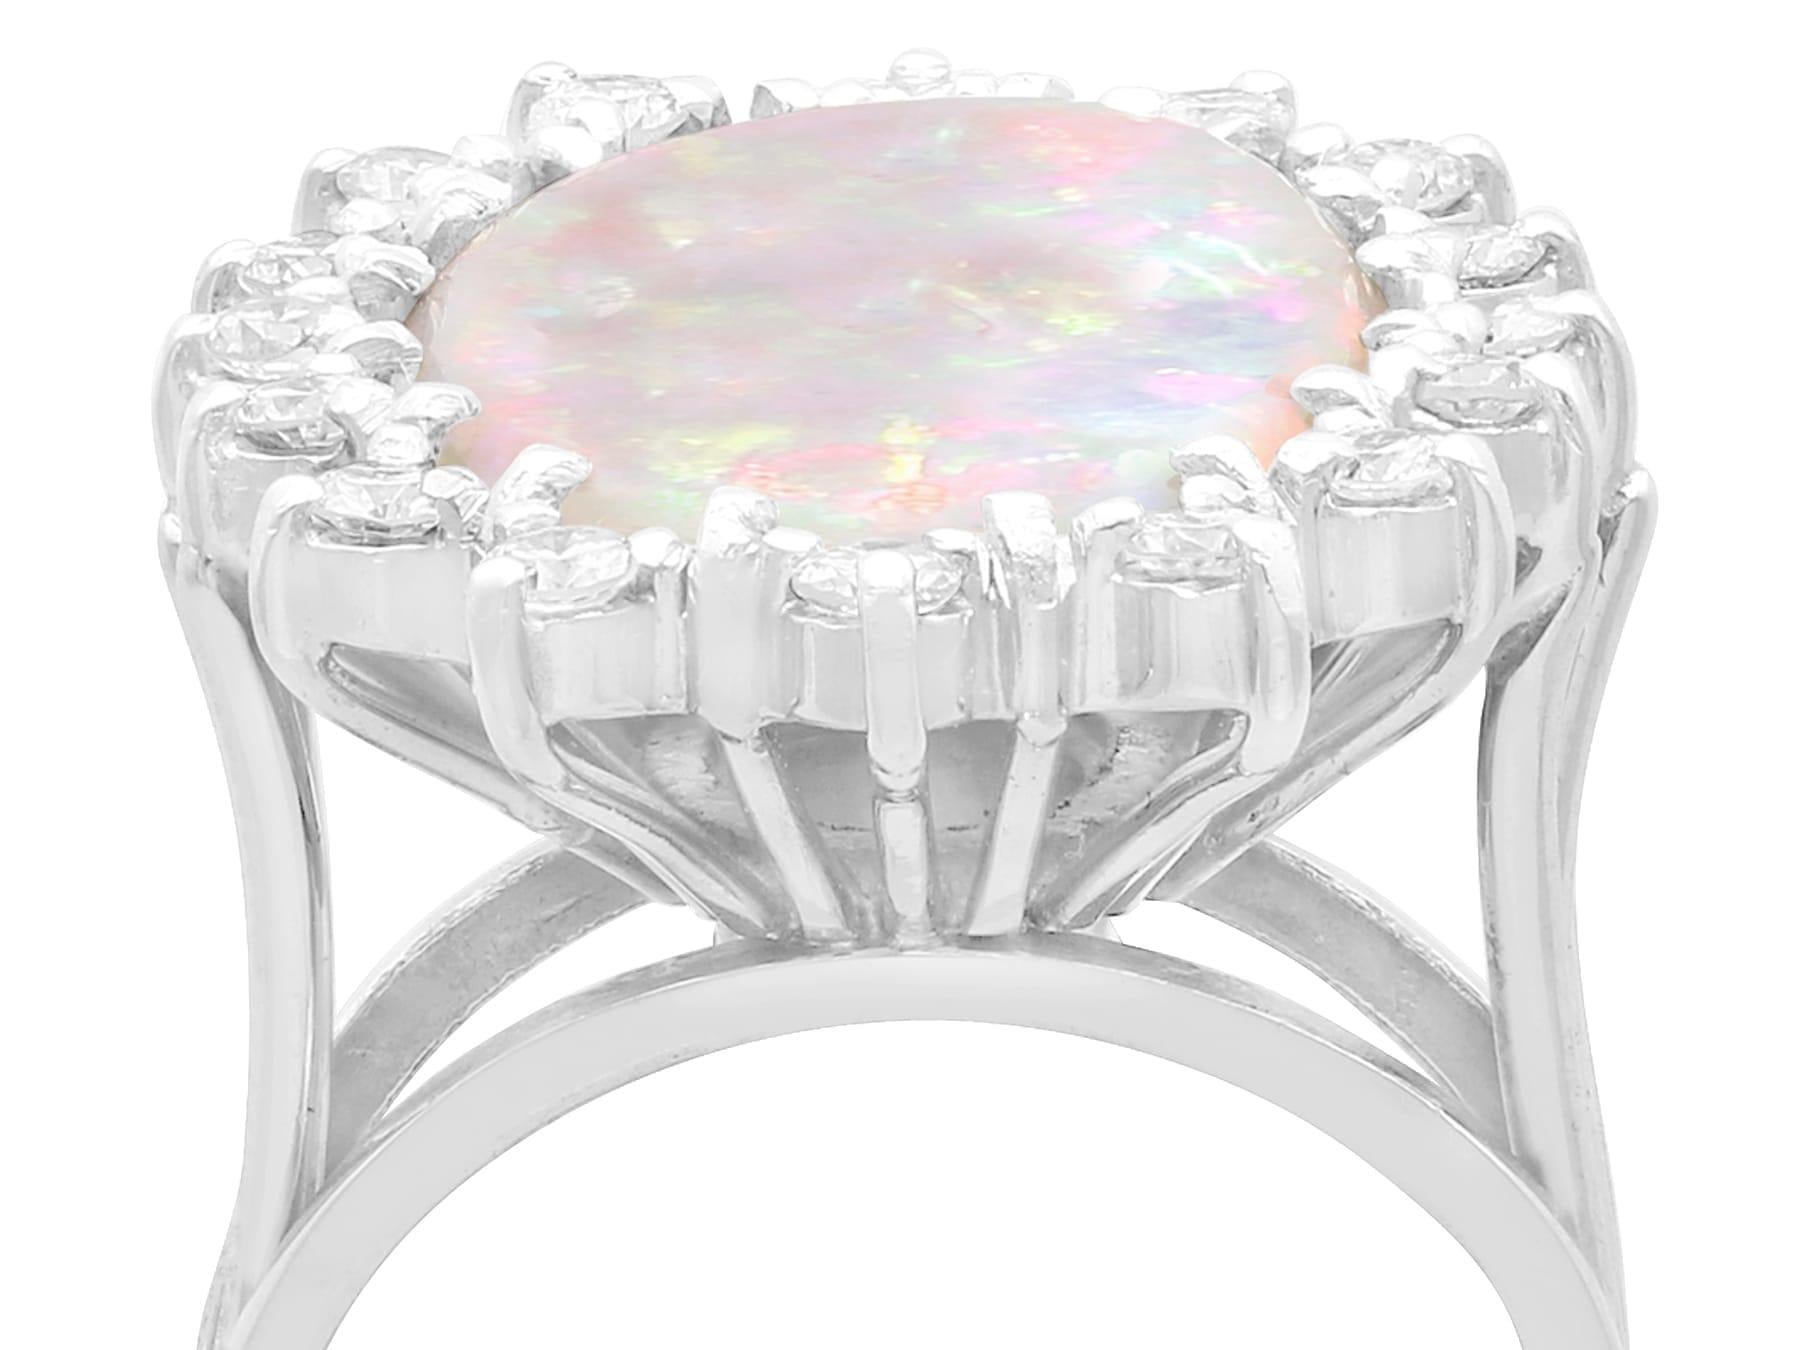 An impressive vintage 5.15 carat opal and 0.48 carat diamond, 14 karat white gold dress ring; part of our diverse opal jewelry and estate jewelry collections.

This fine and impressive 1960s vintage cabochon cut opal and diamond ring has been